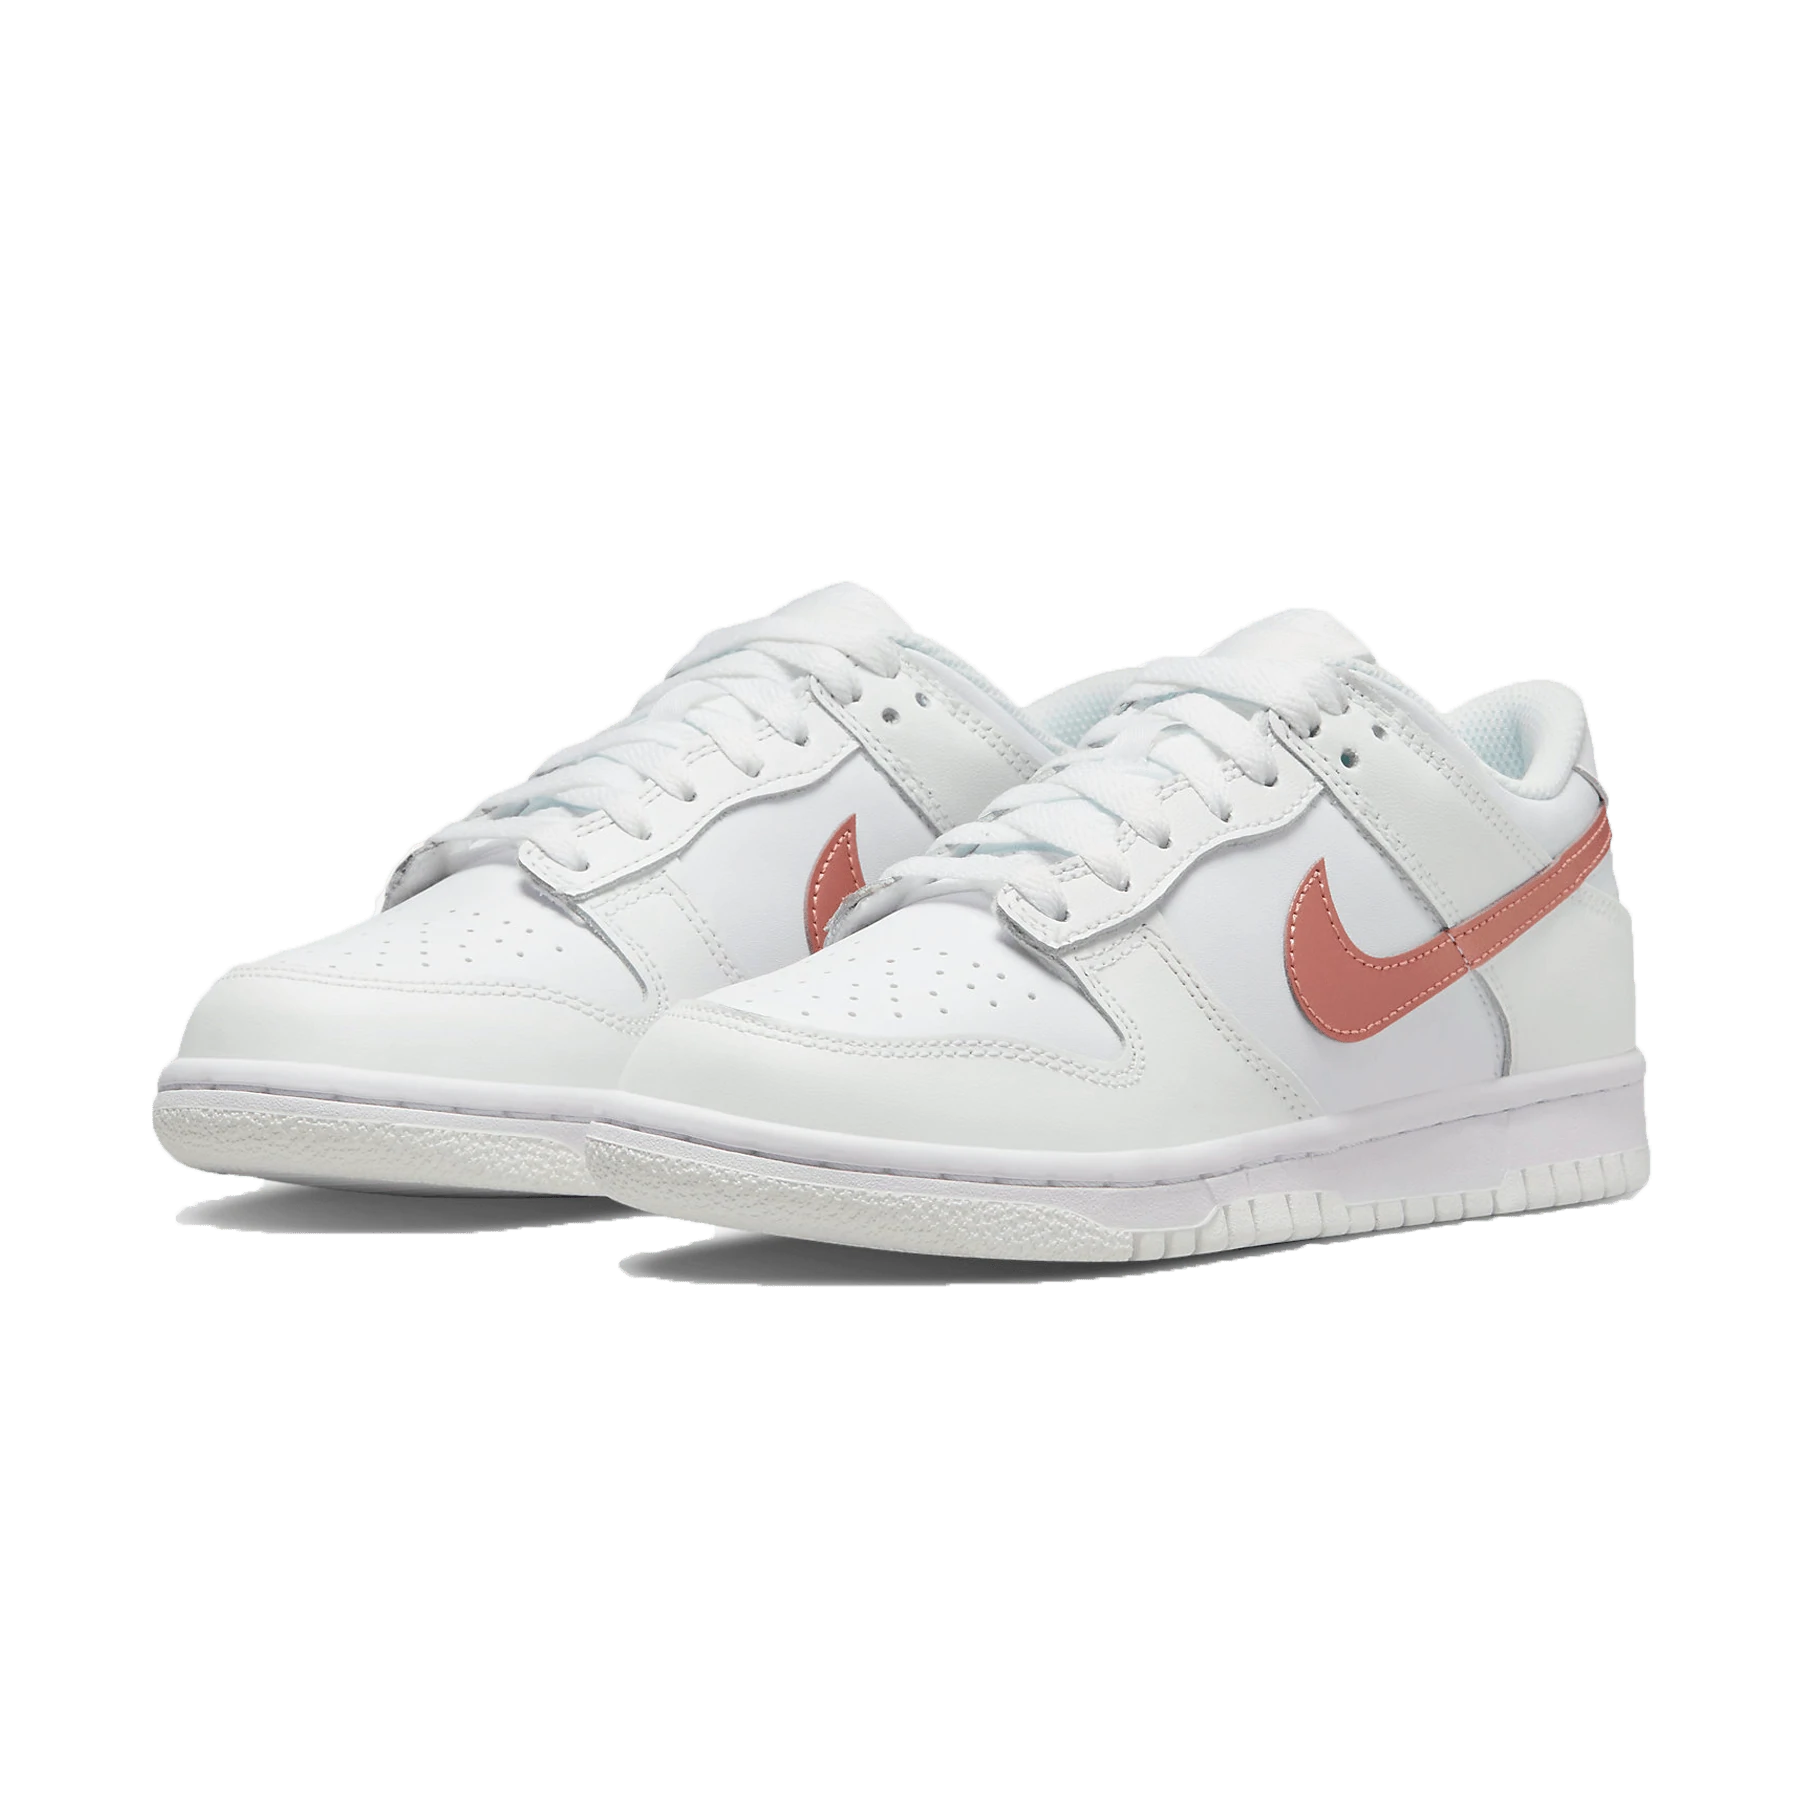 Double Boxed  134.99 Nike Dunk Low White Metallic Red Bronze Double Boxed